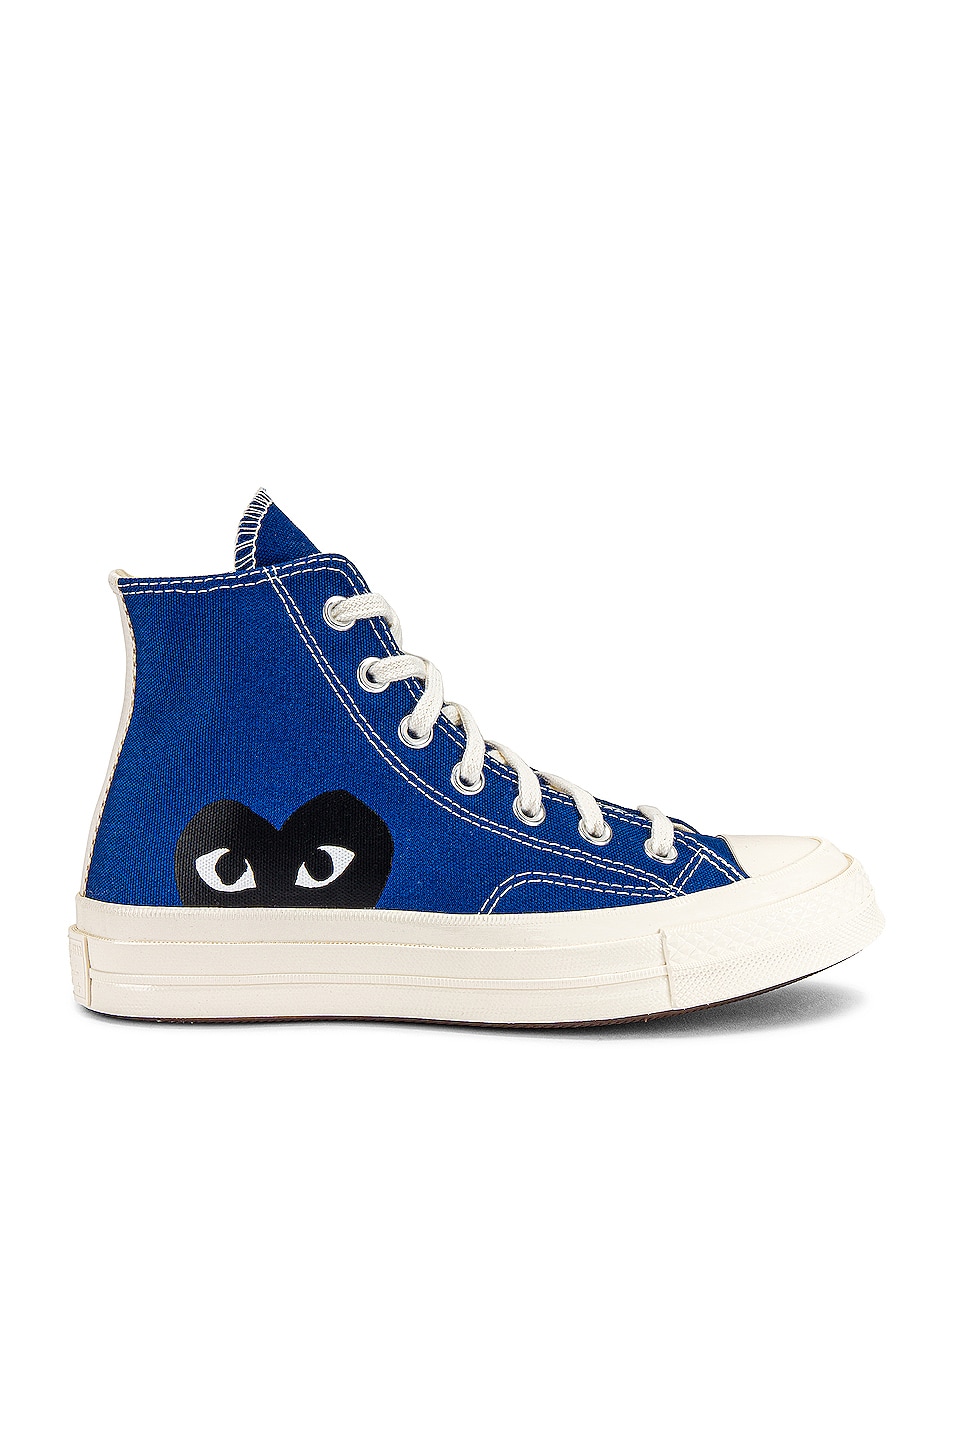 COMME des GARCONS PLAY Converse Chuck Taylor High in Blue | FWRD